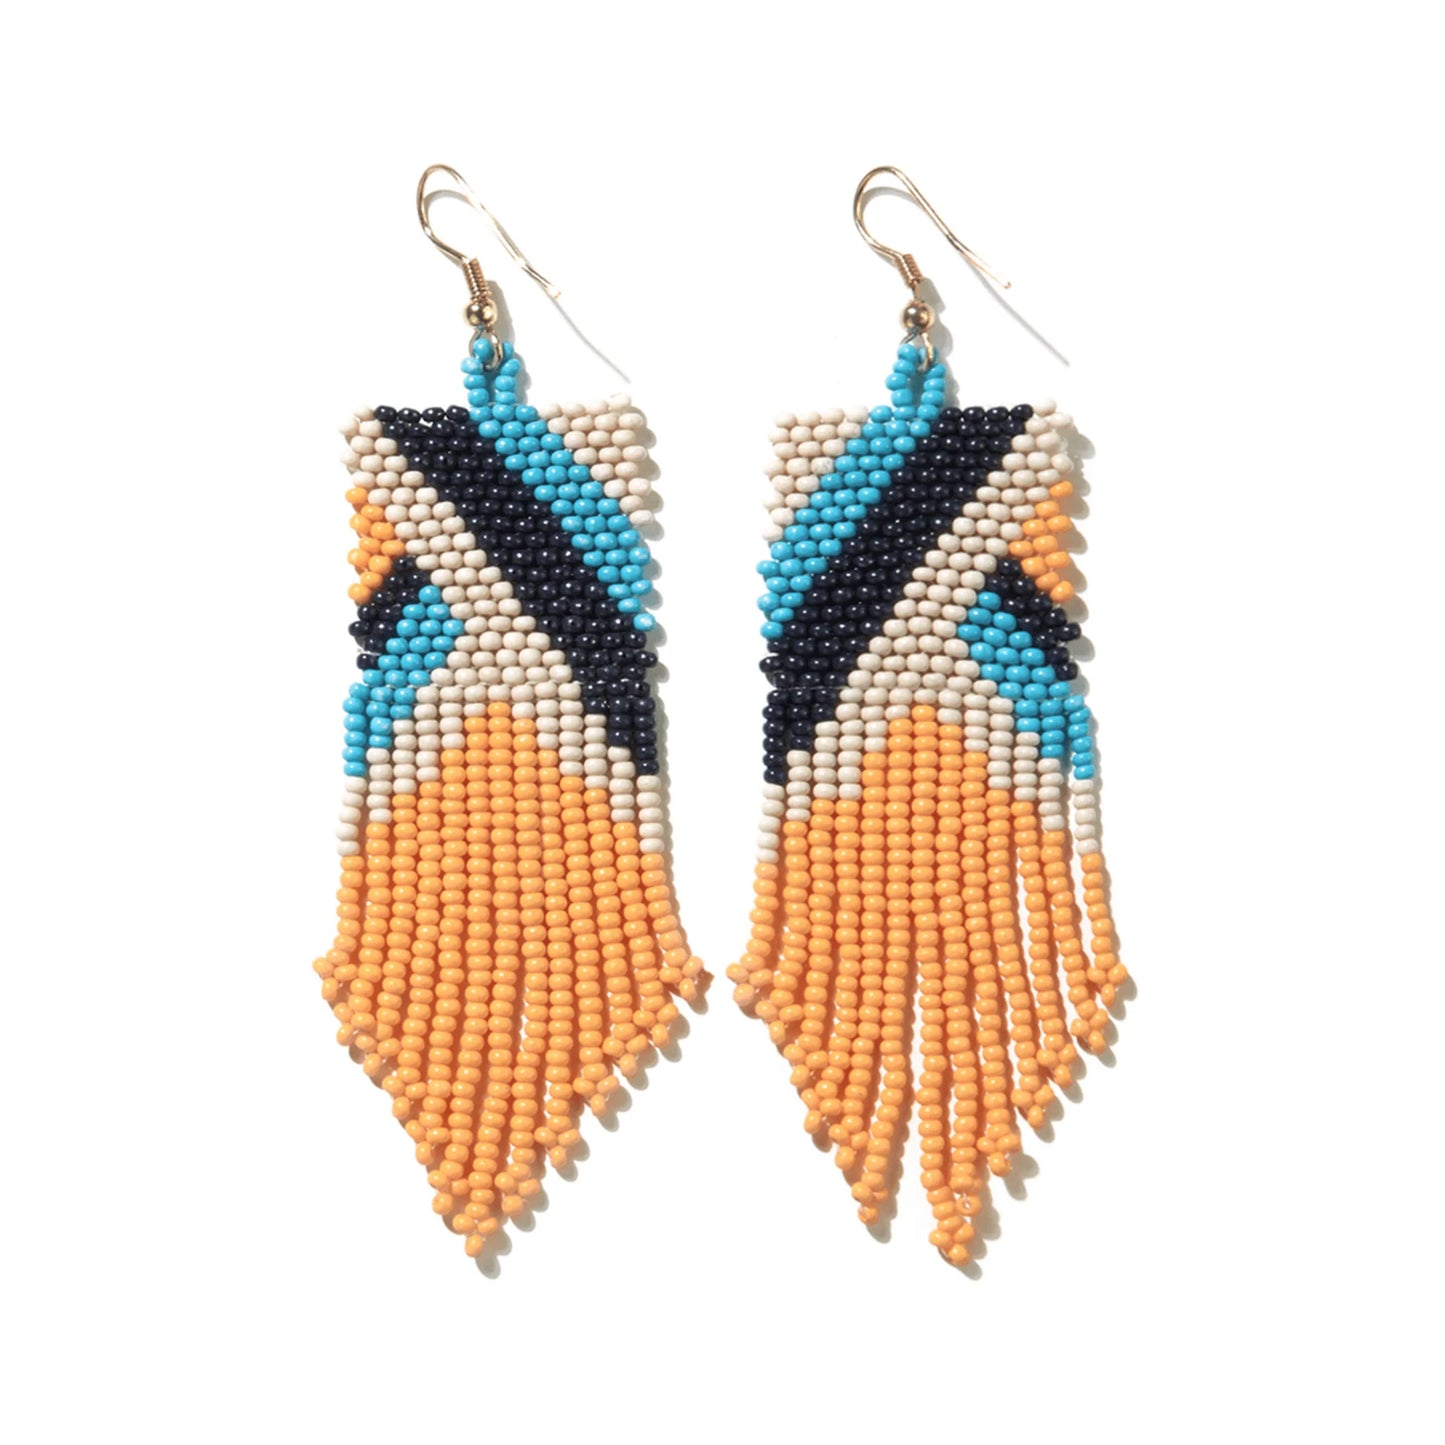 YELLOW IVORY NAVY TURQUOISE STRIPE ANGLES EARRINGS